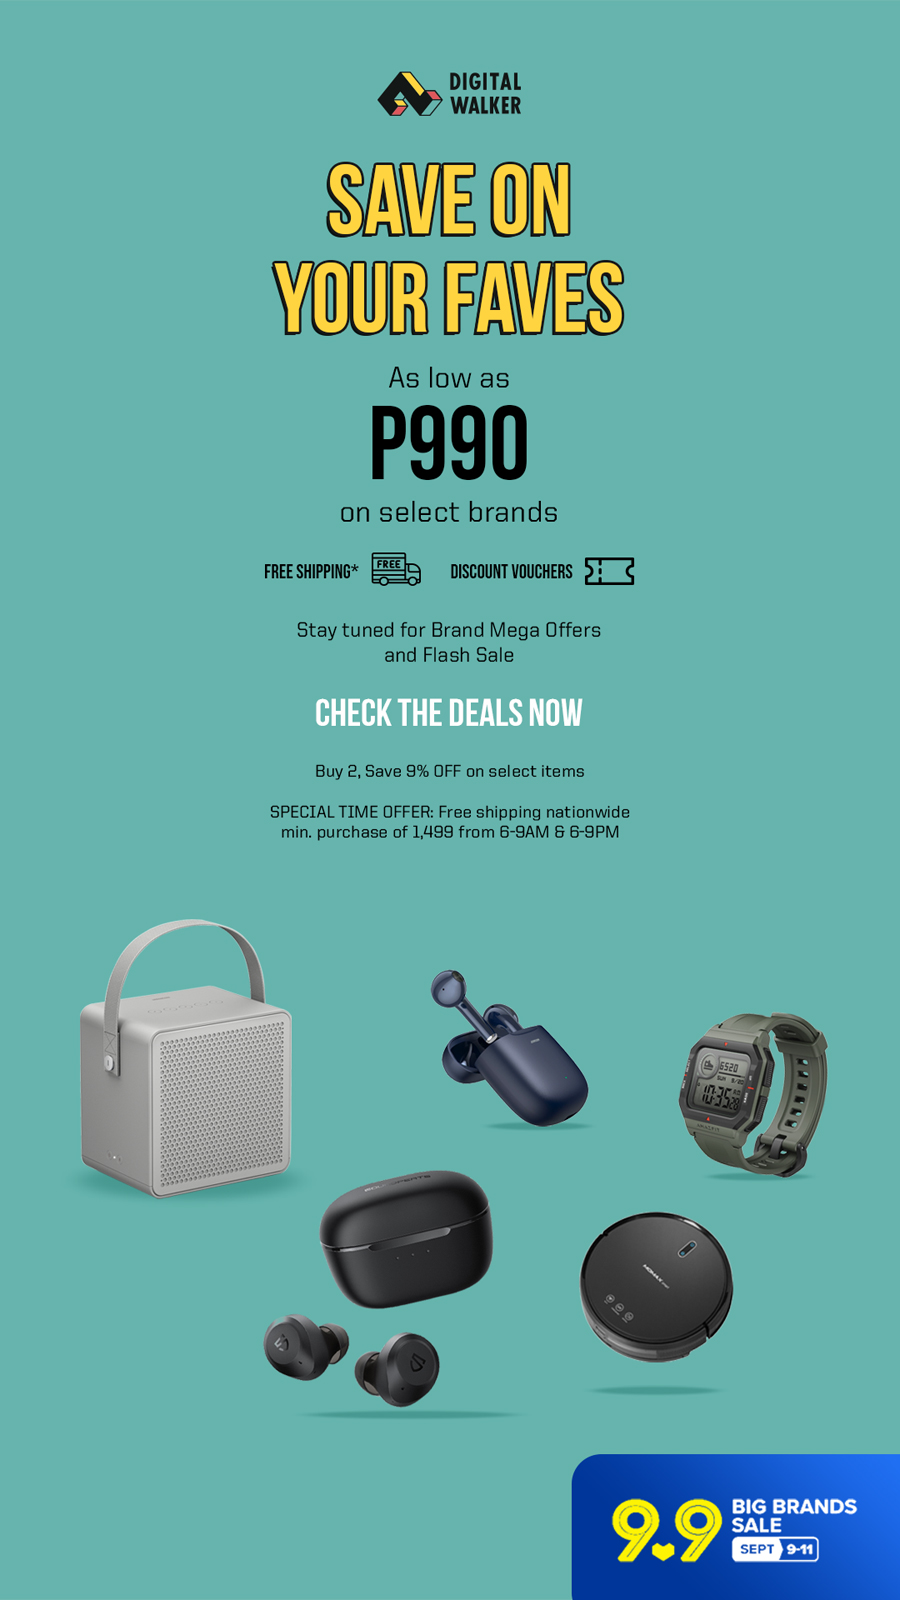 Up to 75% OFF on Beyond the Box and Digital Walker's best-selling brands on Lazada 9.9 Big Brands Sale!